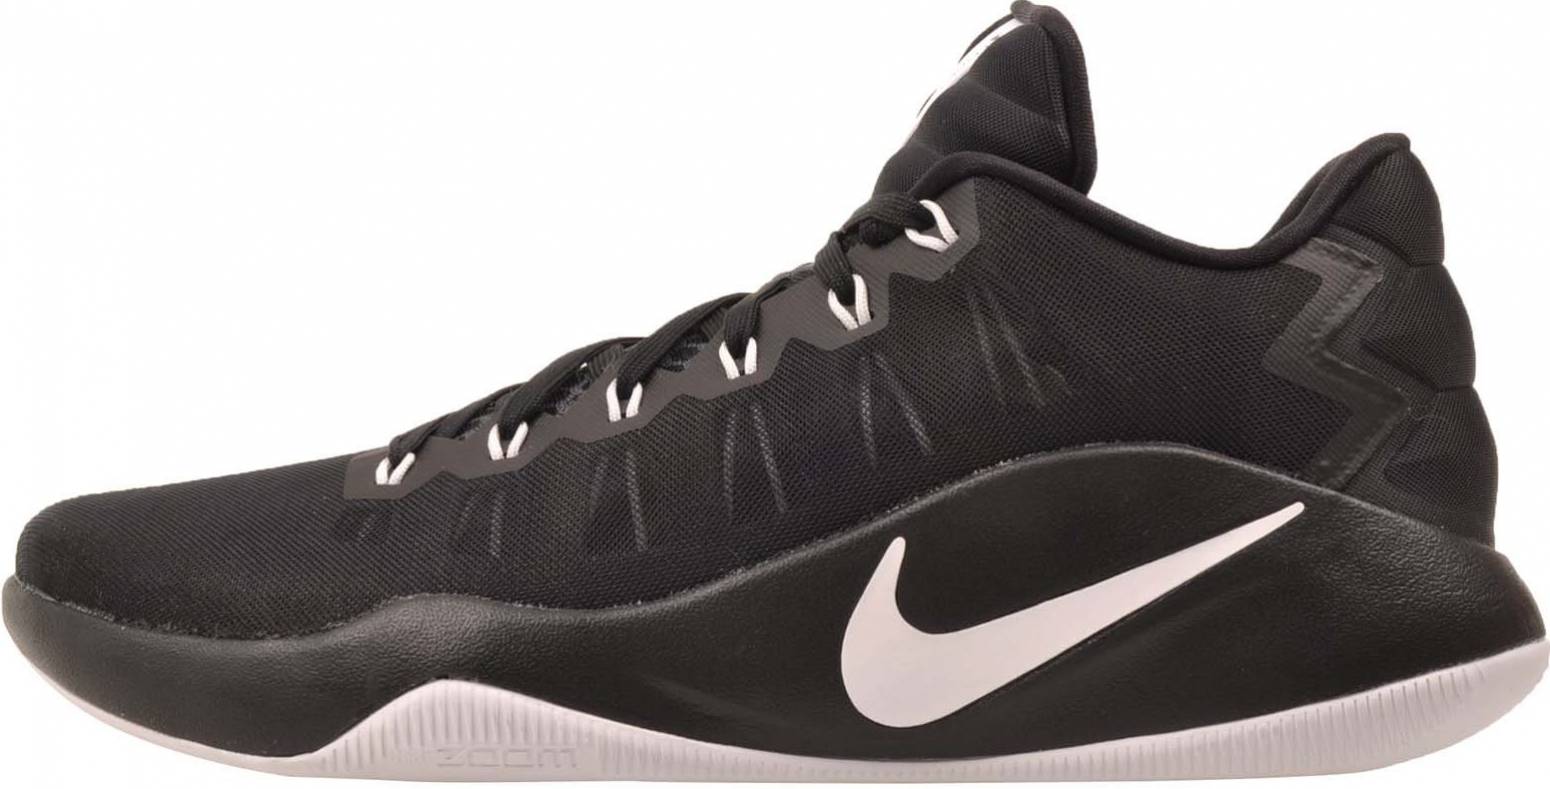 Review of Nike Hyperdunk 2016 Low 